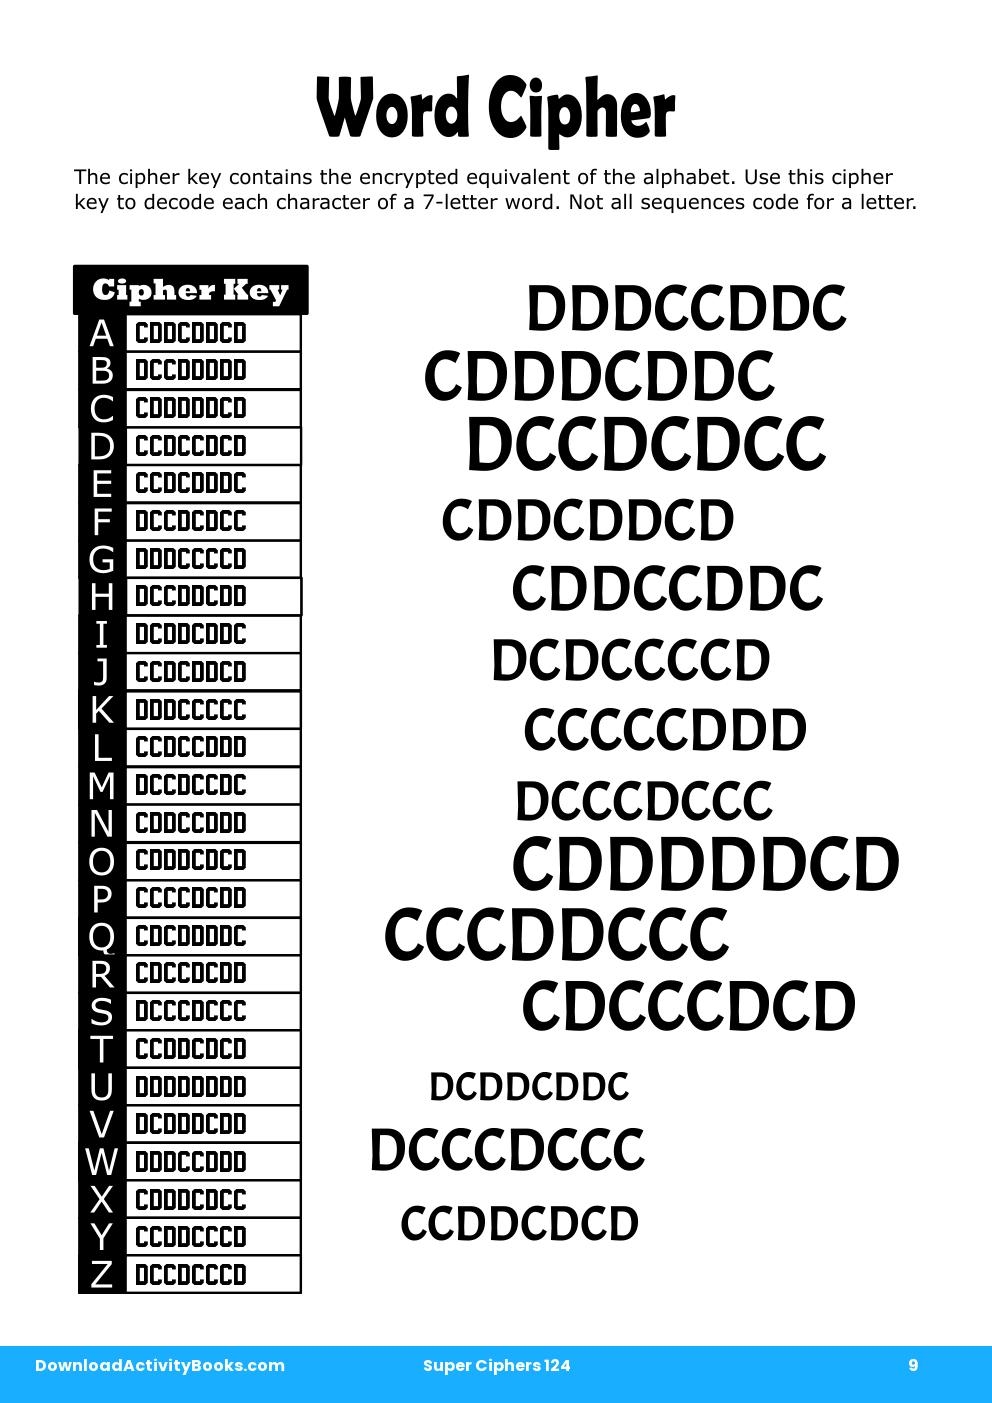 Word Cipher in Super Ciphers 124